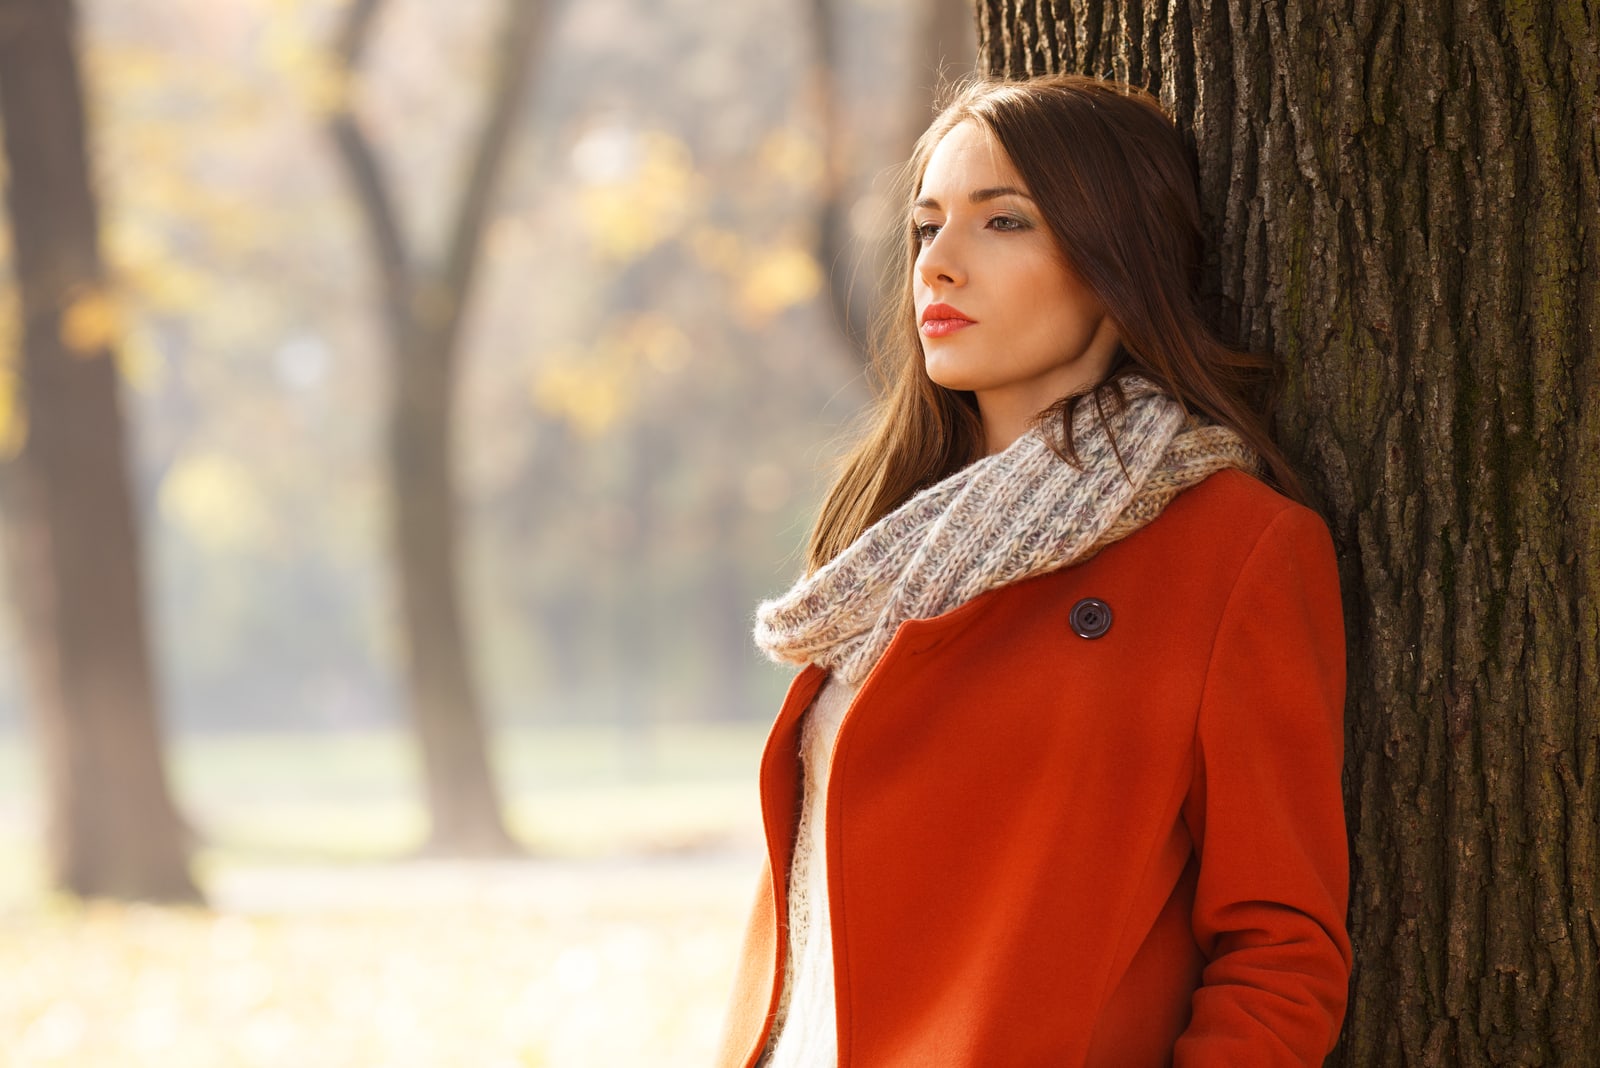 beautiful woman standing in park alone